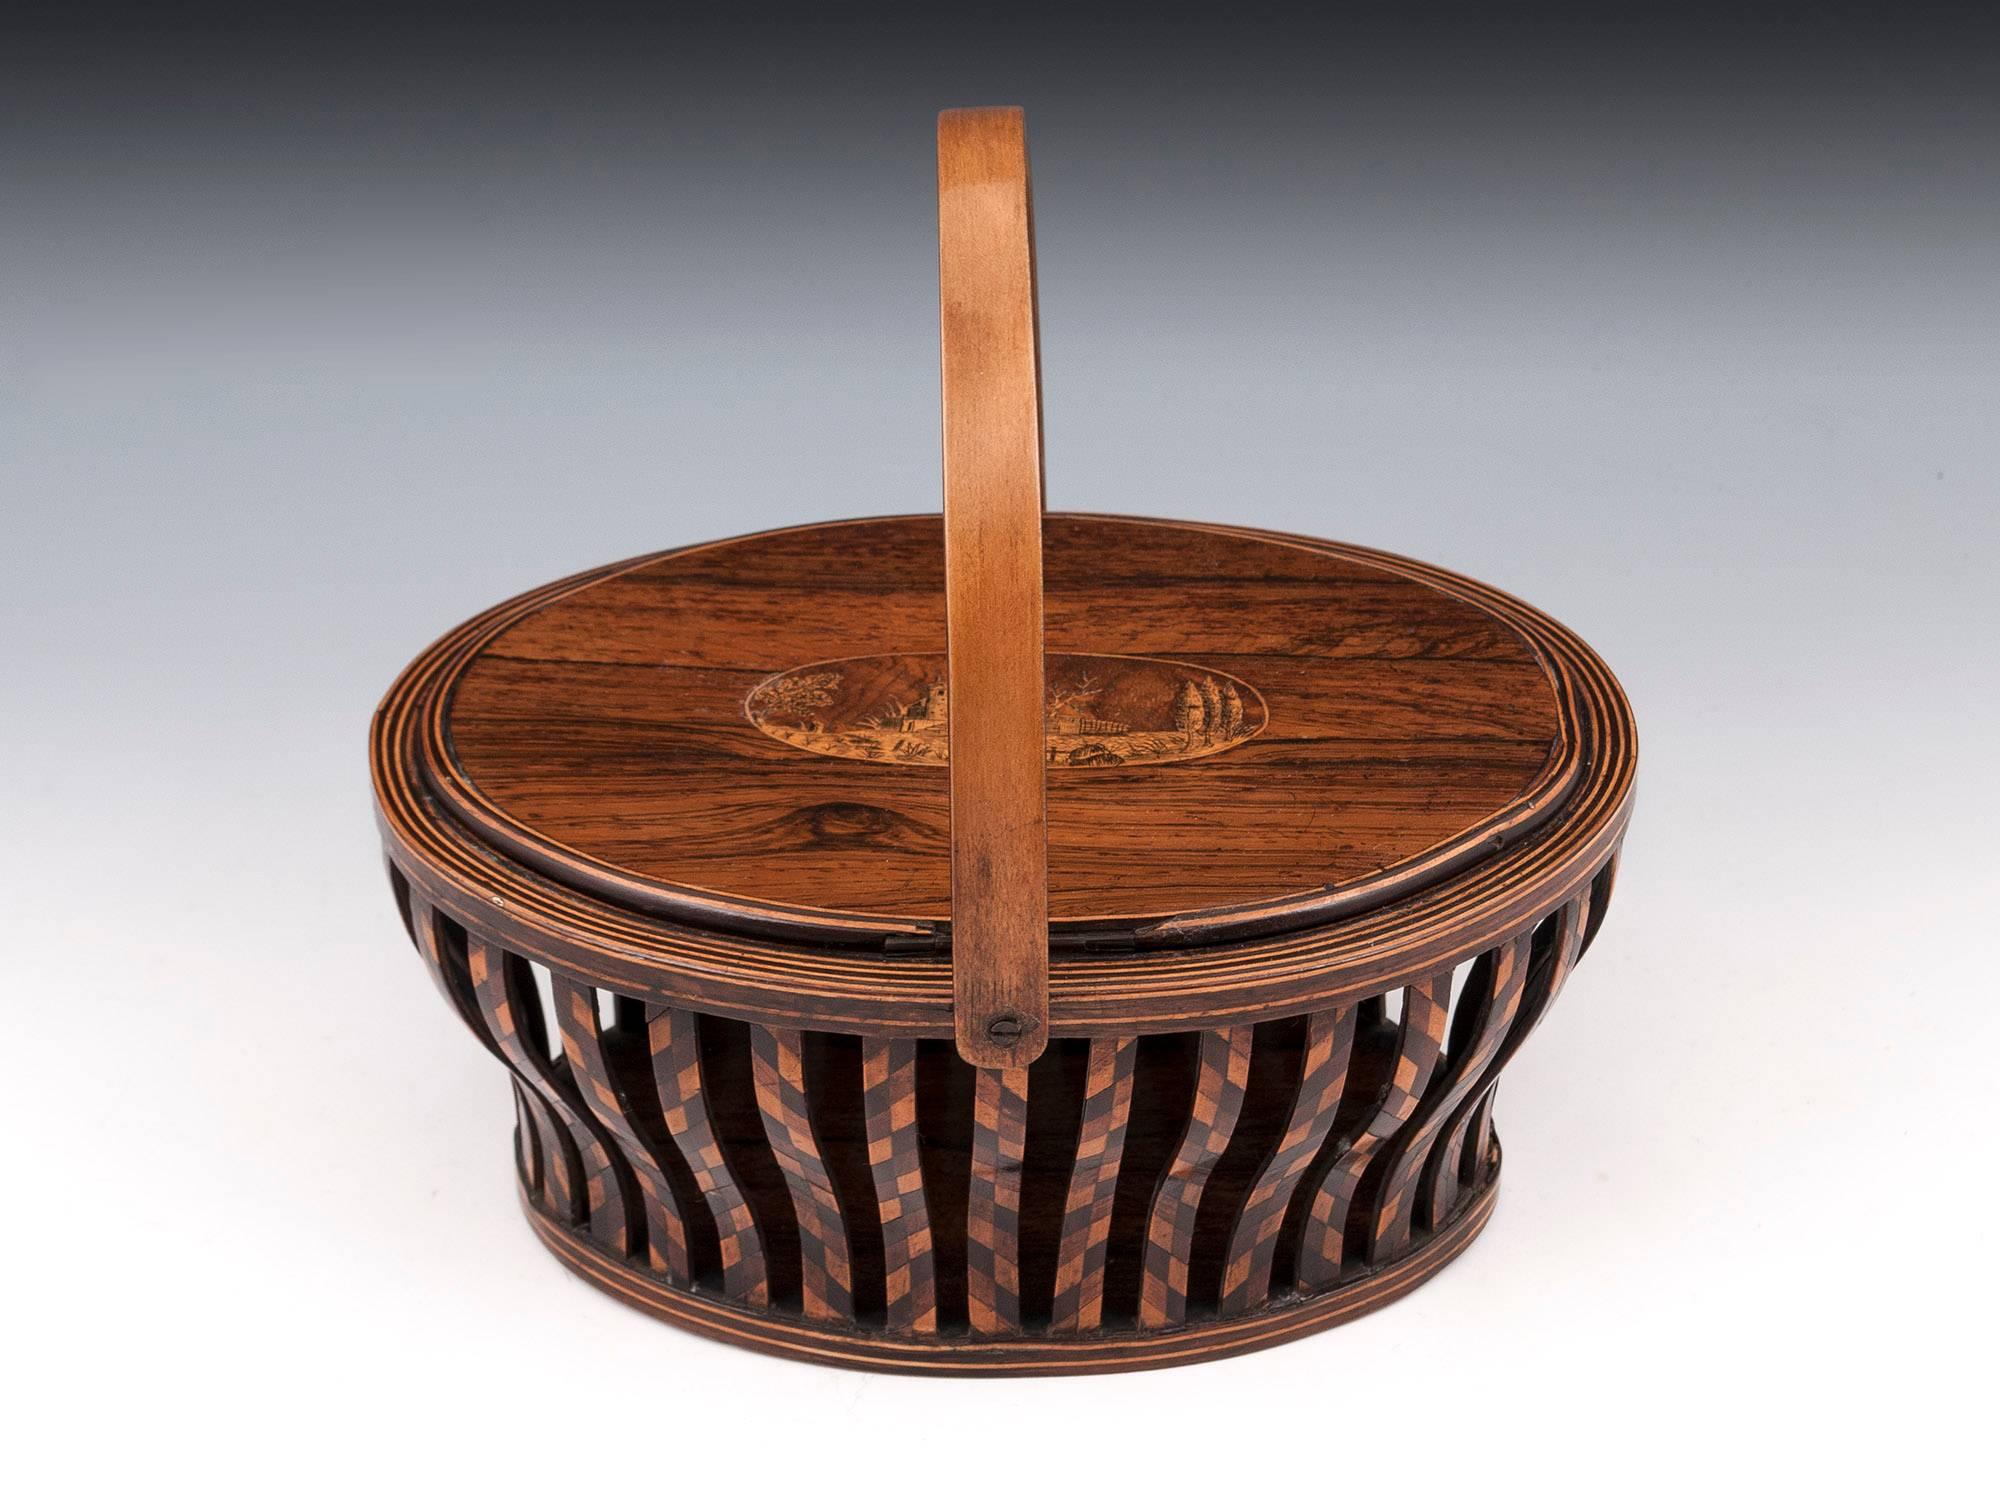 Antique sewing basket with shaped sycamore carry handle. On the top of the box is a naive penwork rural scene similar to Kilarney Ware. Each shaped side supports is veneered with a chequered design of Mahogany, Sycamore and Yew. The hinged lid has a